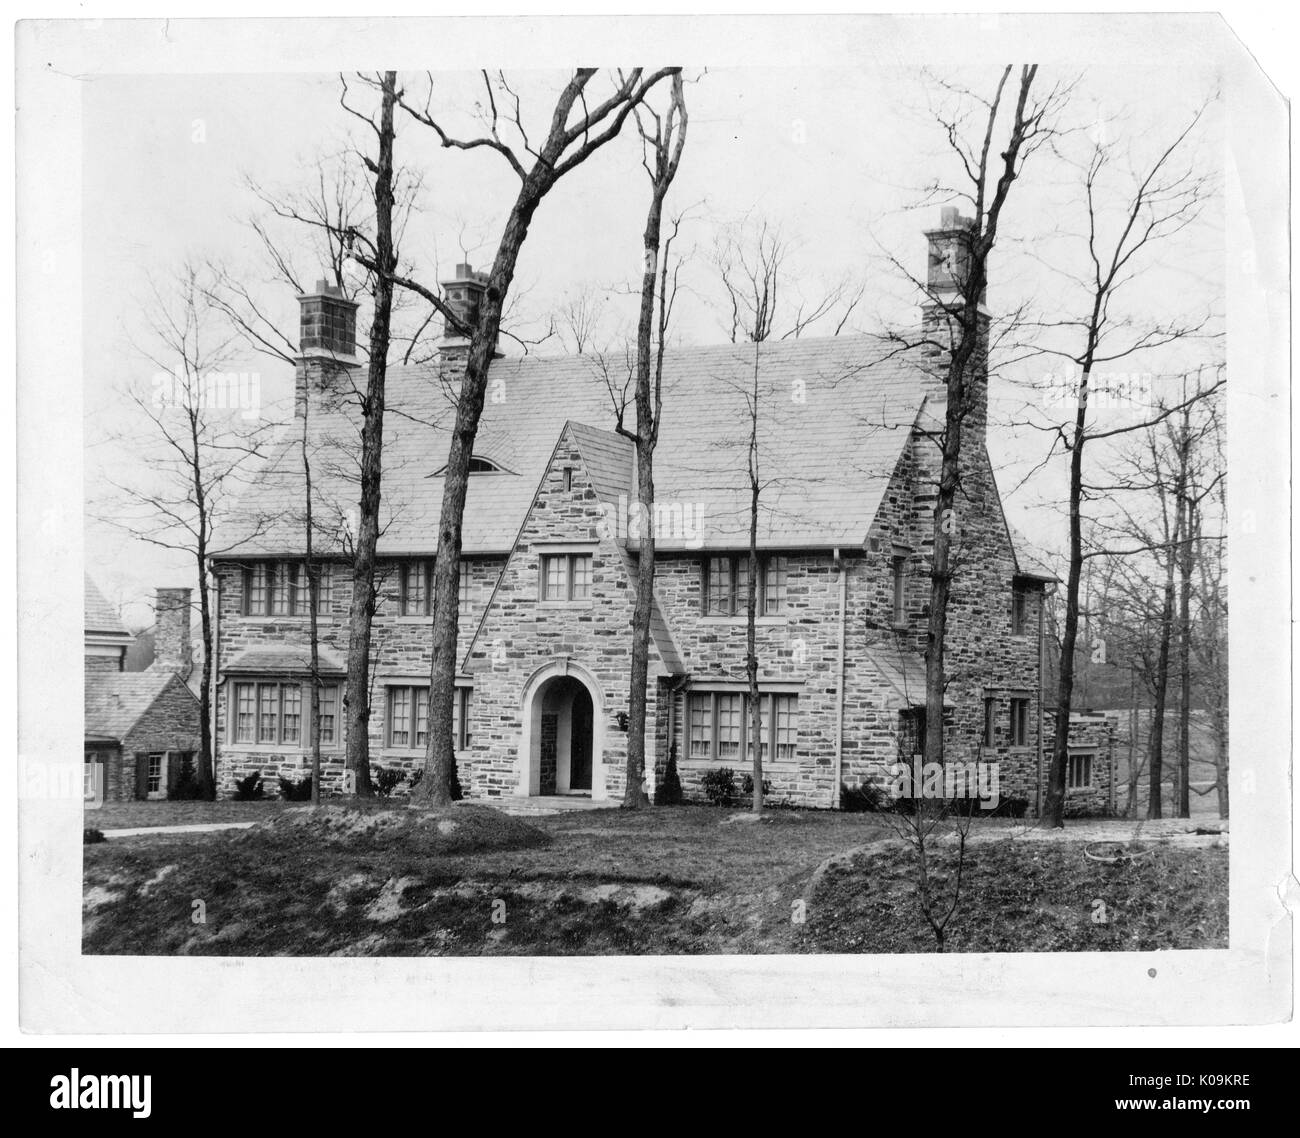 Landscape shot of a large, stone house with two chimneys, a stylized entrance, no landscaping surrounding the building immediately, tall trees without leaves nearby, Roland Park/Guilford, Baltimore, Maryland, 1910. This image is from a series documenting the construction and sale of homes in the Roland Park/Guilford neighborhood of Baltimore, a streetcar suburb and one of the first planned communities in the United States. The neighborhood was segregated, and is considered an early example of the enforcement of racial segregation through the use of restricted covenants. Stock Photo